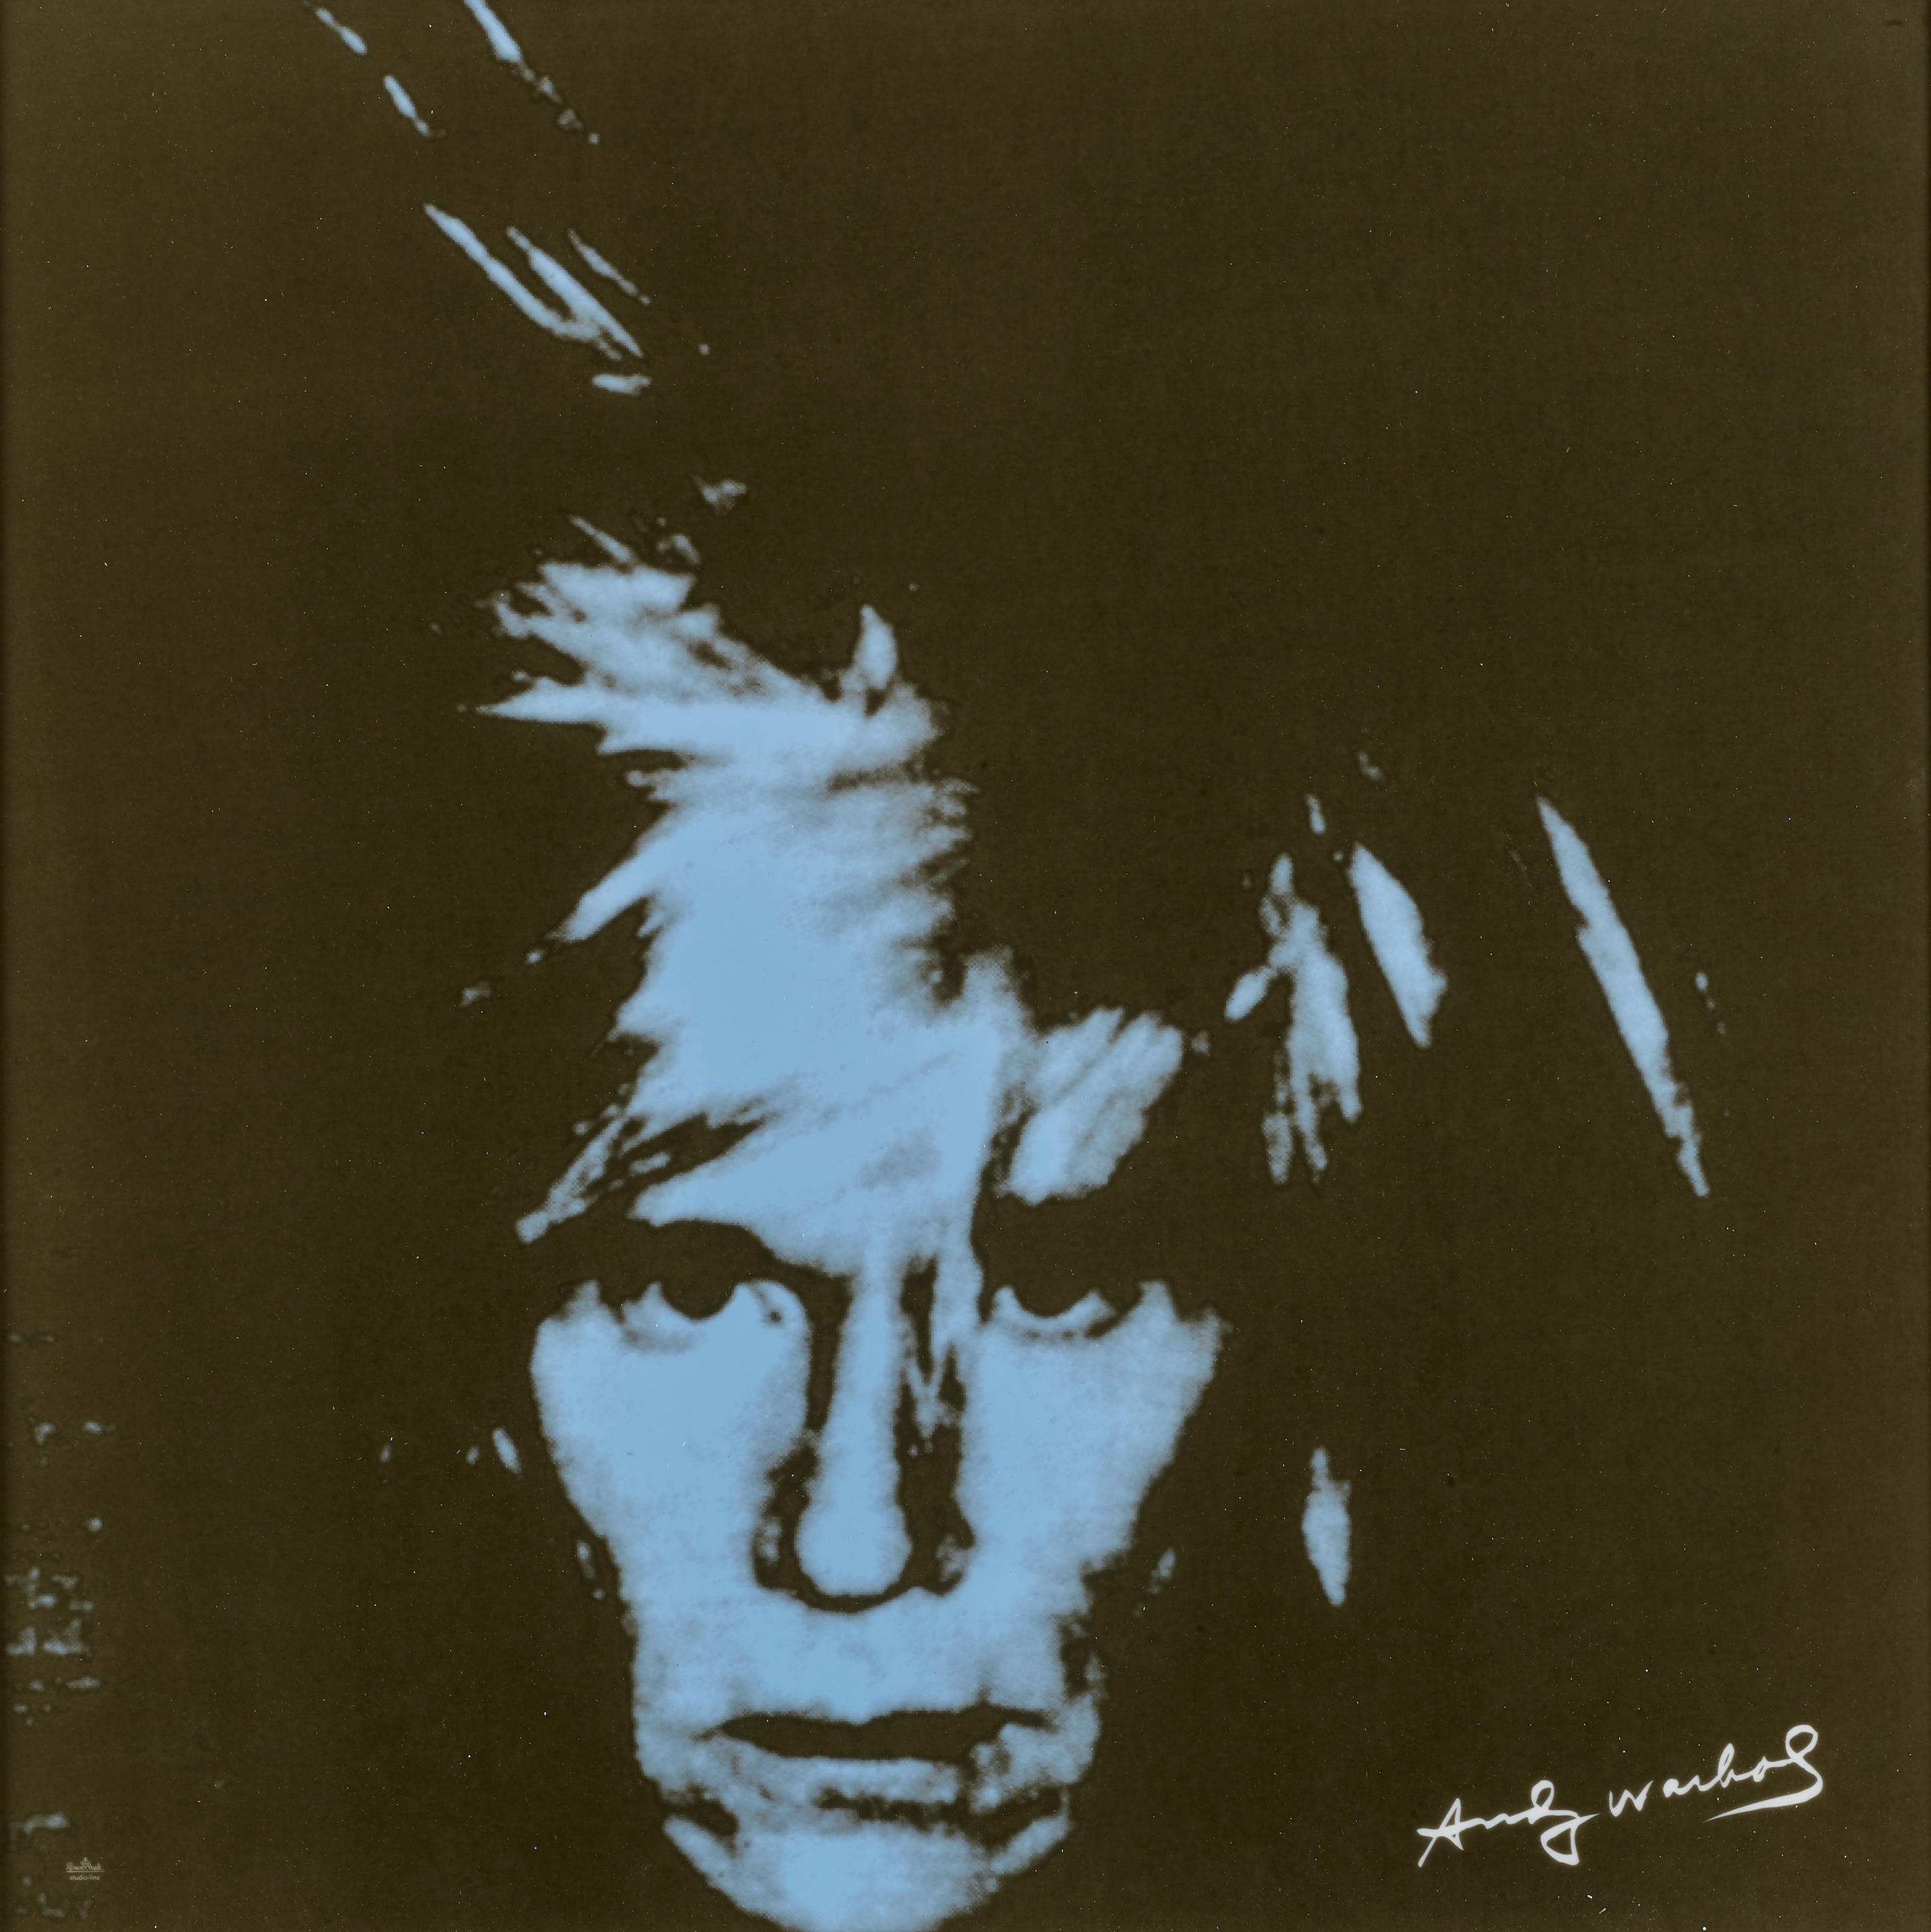 After Andy Warhol